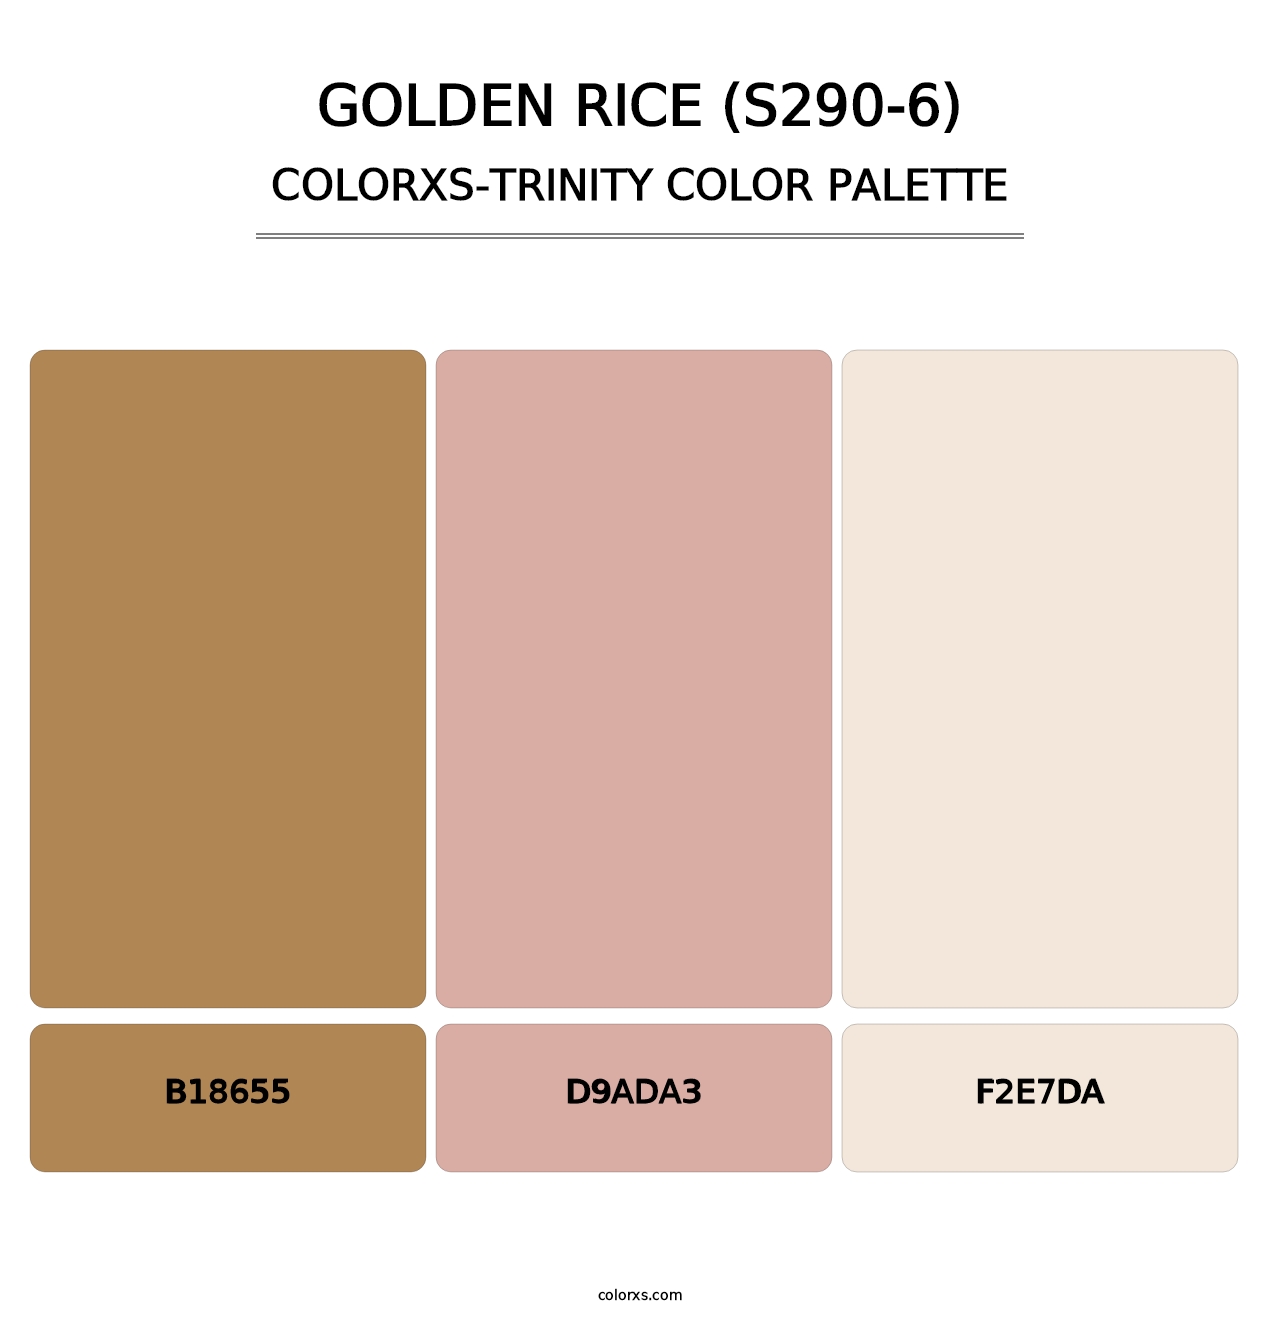 Golden Rice (S290-6) - Colorxs Trinity Palette